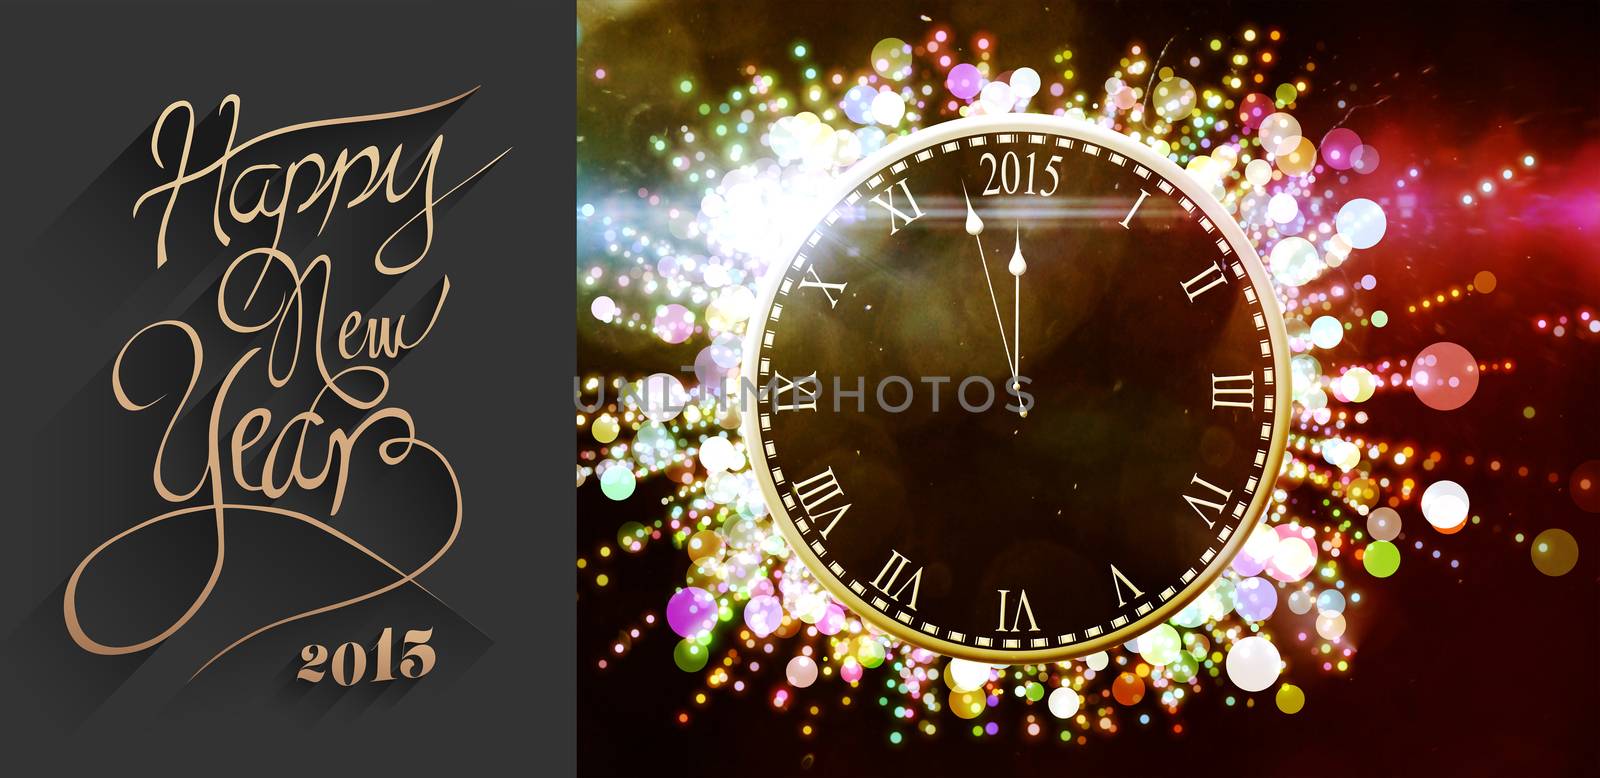 Classy new year greeting against black and gold new year graphic